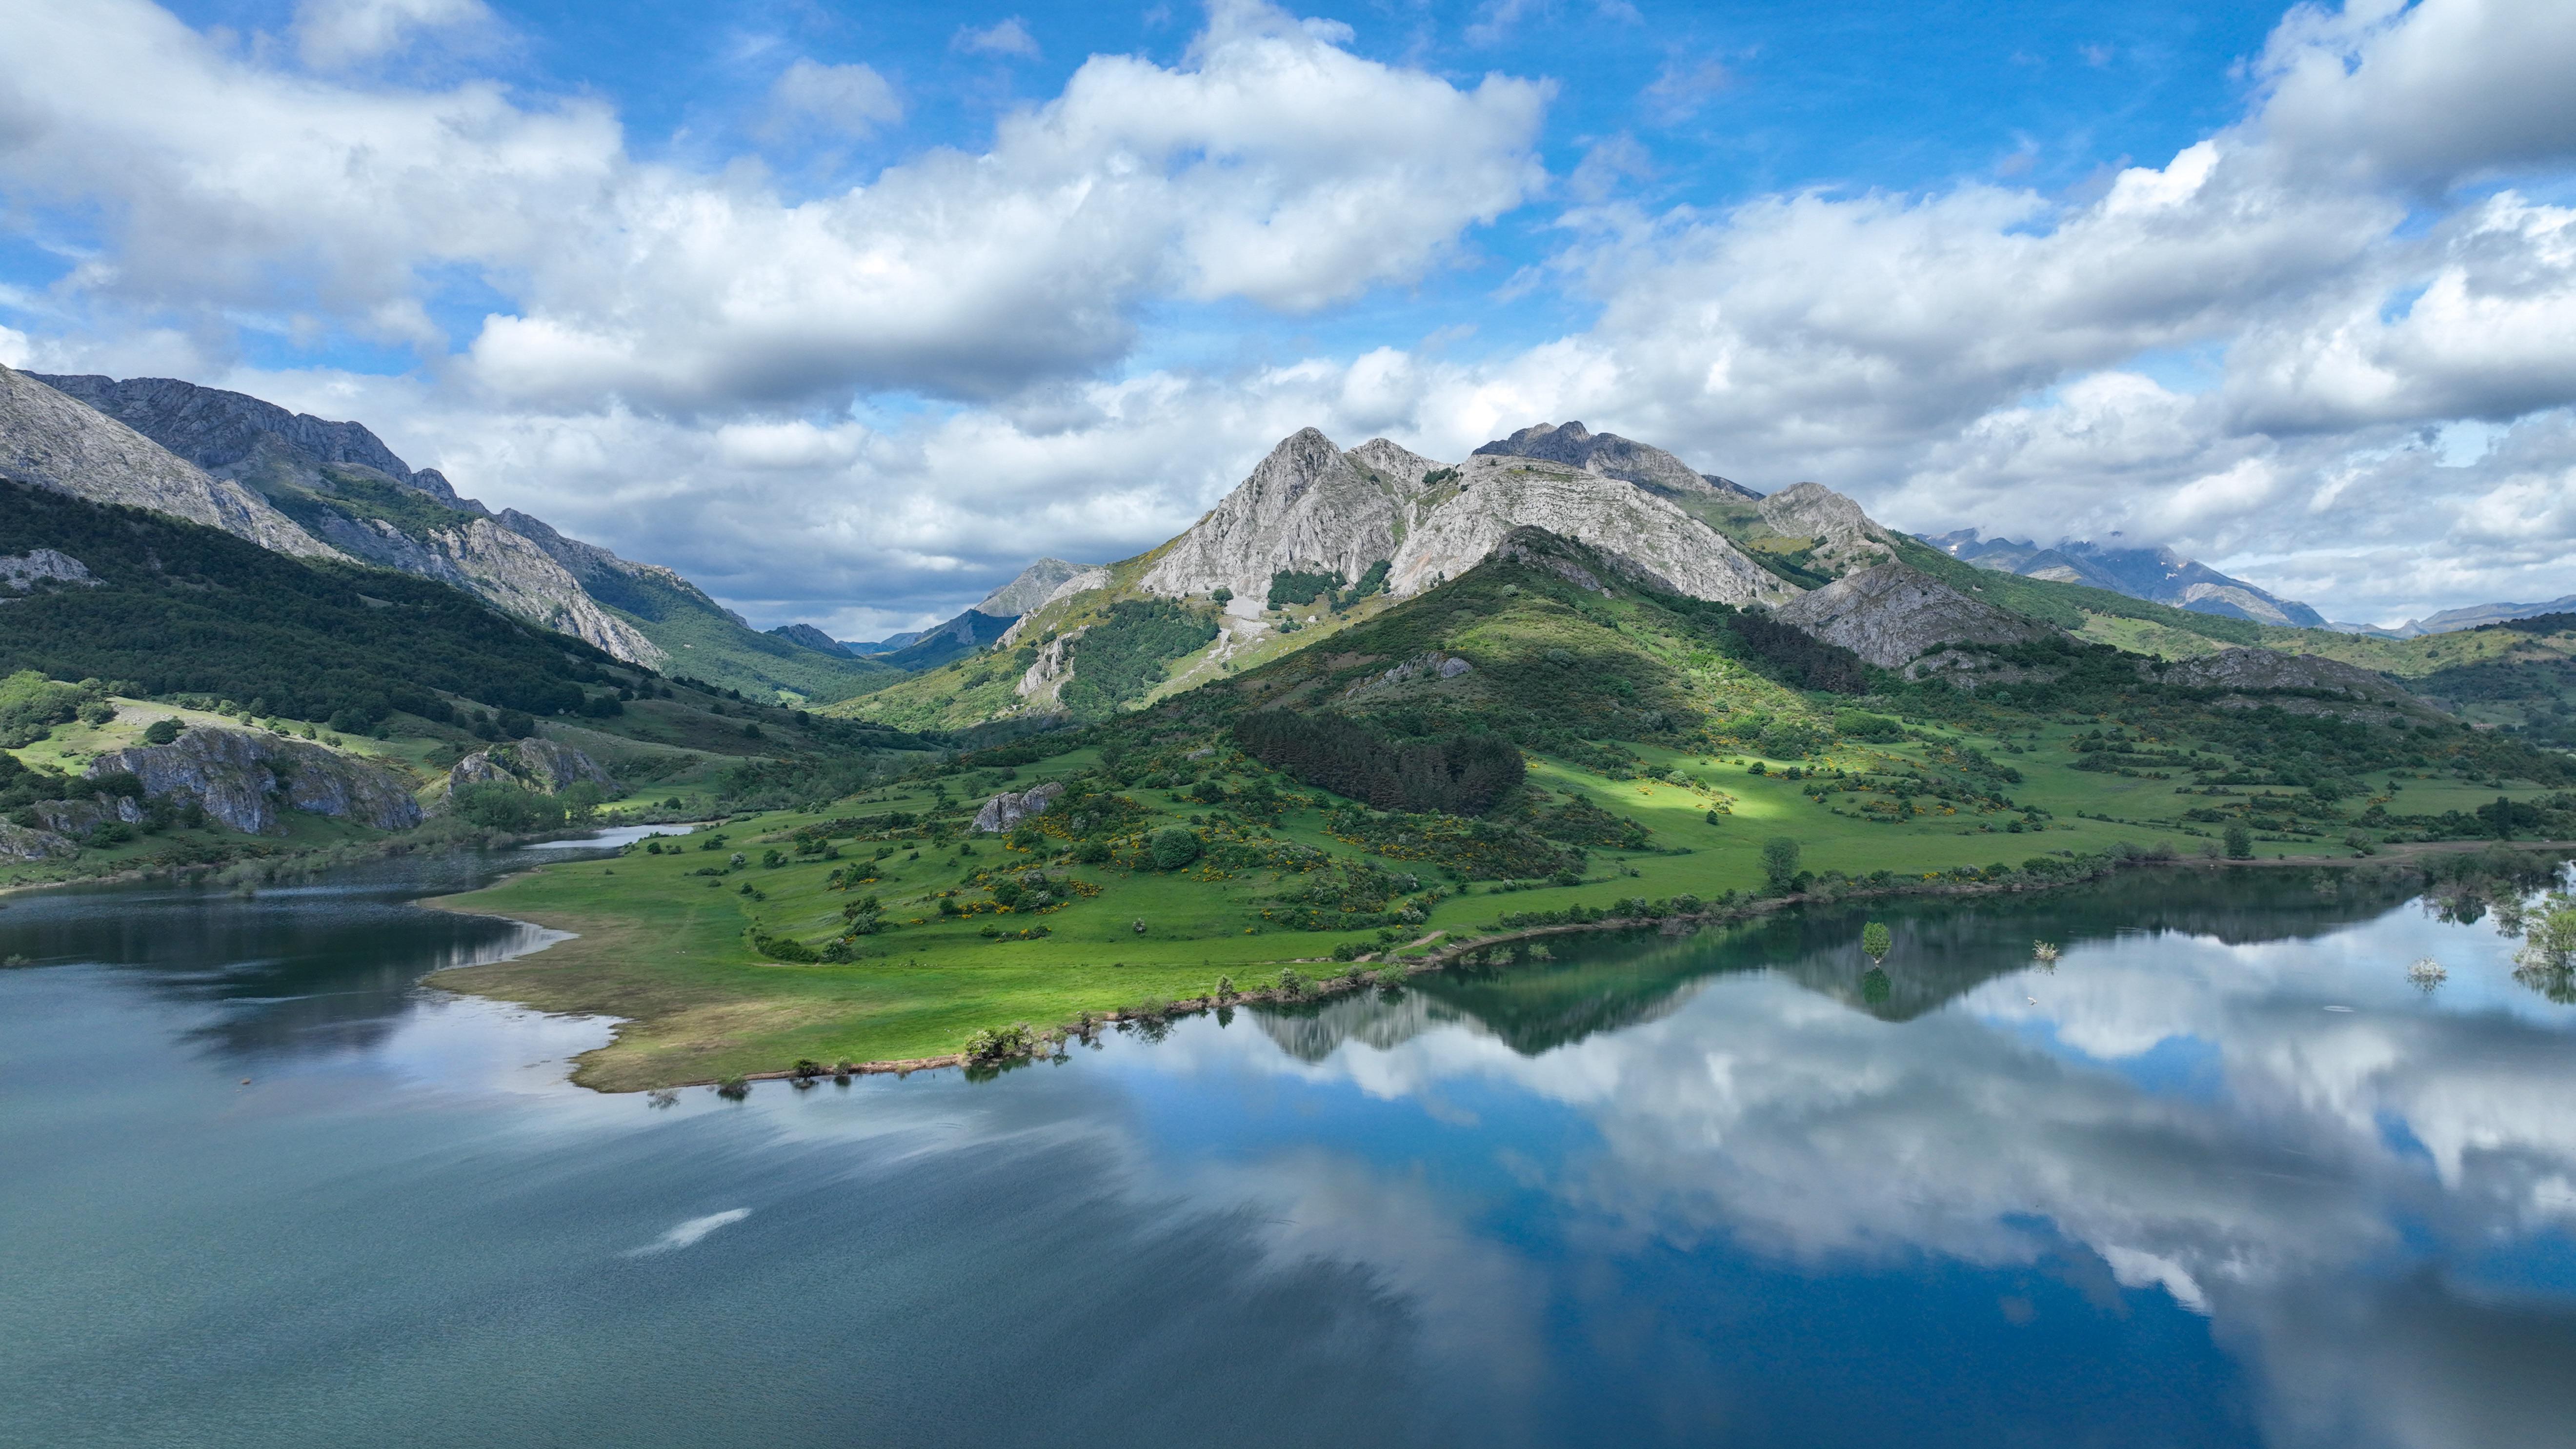 Landscape Nature Lake Spain Clouds Mountains Water Reflection 5280x2970